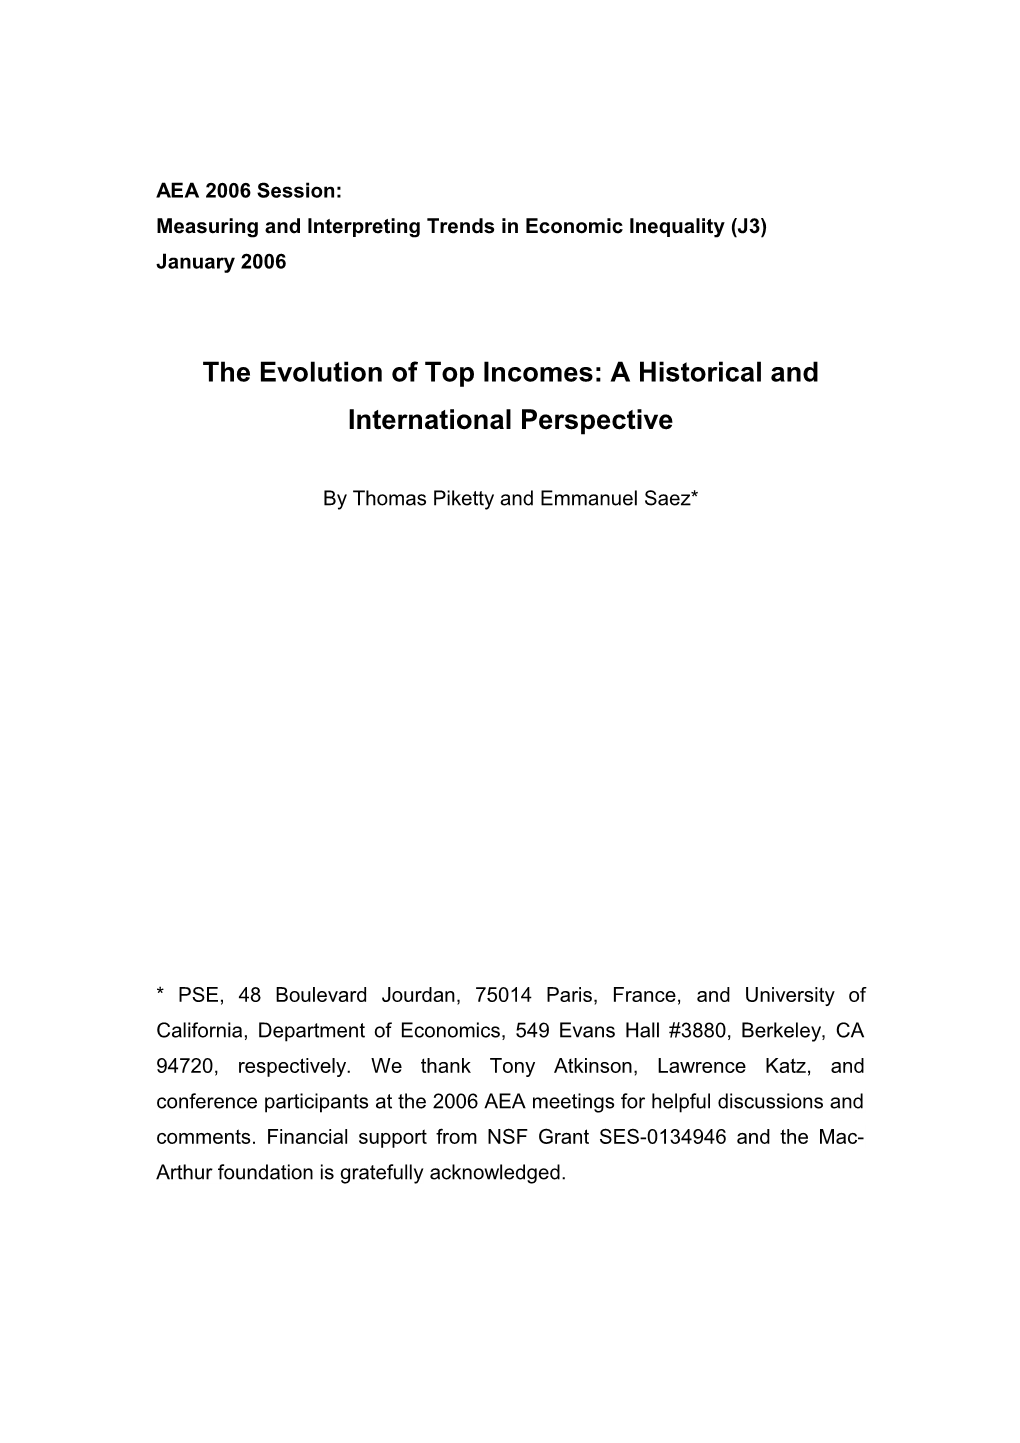 Measuring and Interpreting Trends in Economic Inequality (J3)